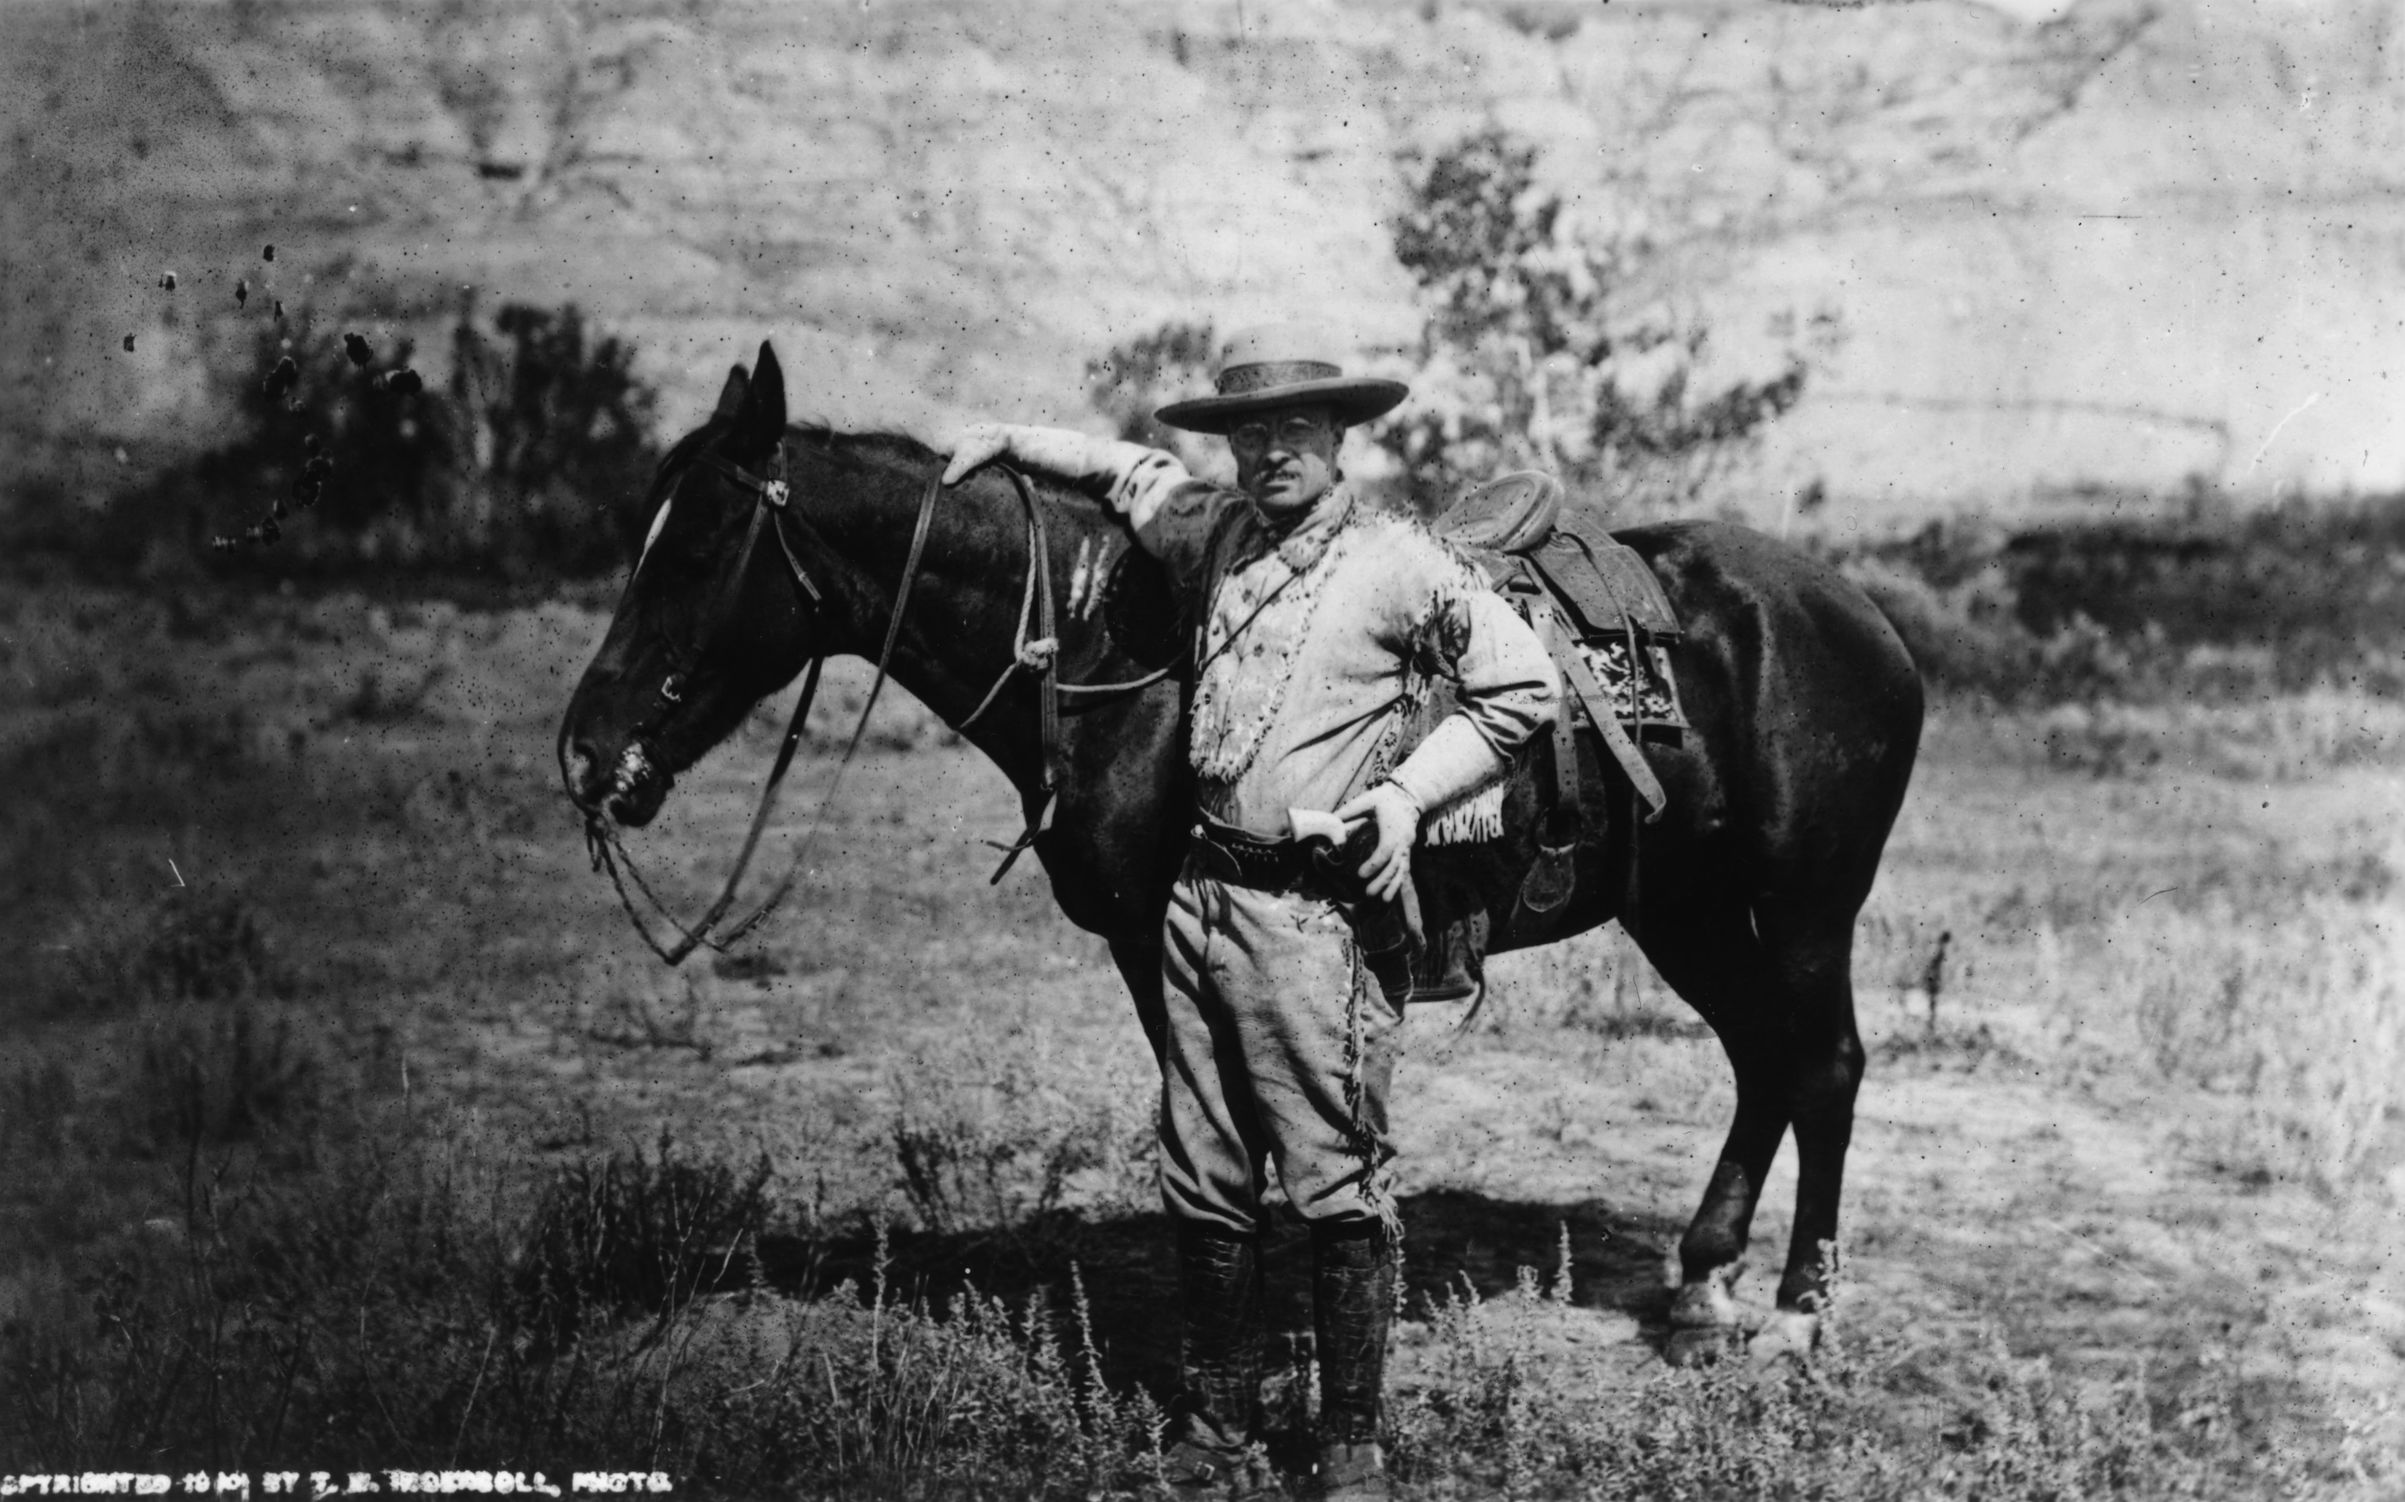 American politician and future President of the United States of America, Theodore Roosevelt (1858 - 1919) during a visit to the Badlands of Dakota after the death of his first wife, in 1885. (MPI/Getty Images)